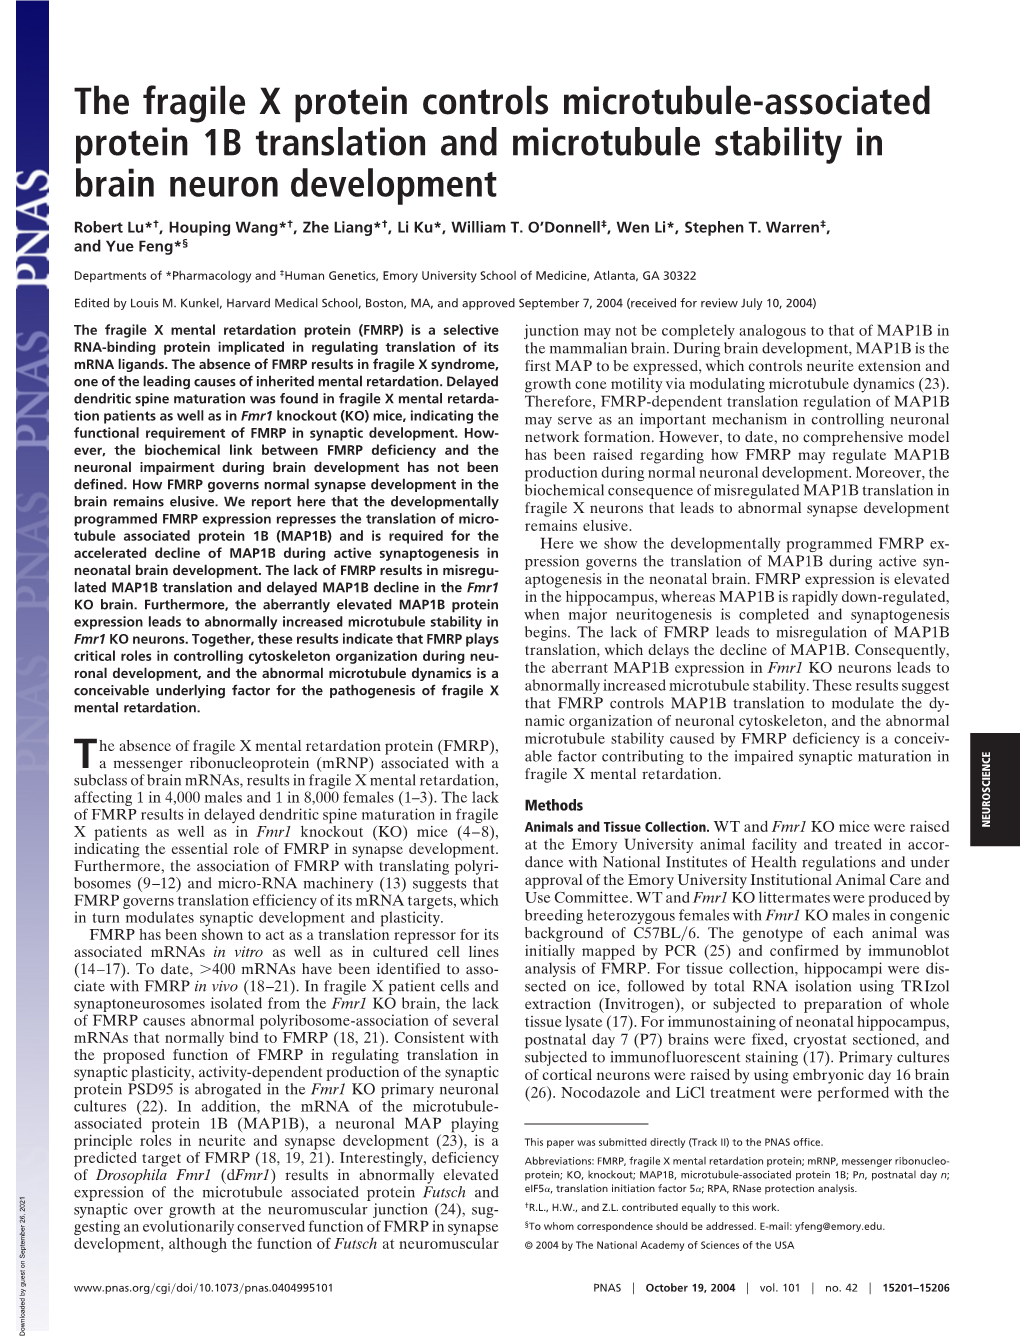 The Fragile X Protein Controls Microtubule-Associated Protein 1B Translation and Microtubule Stability in Brain Neuron Development